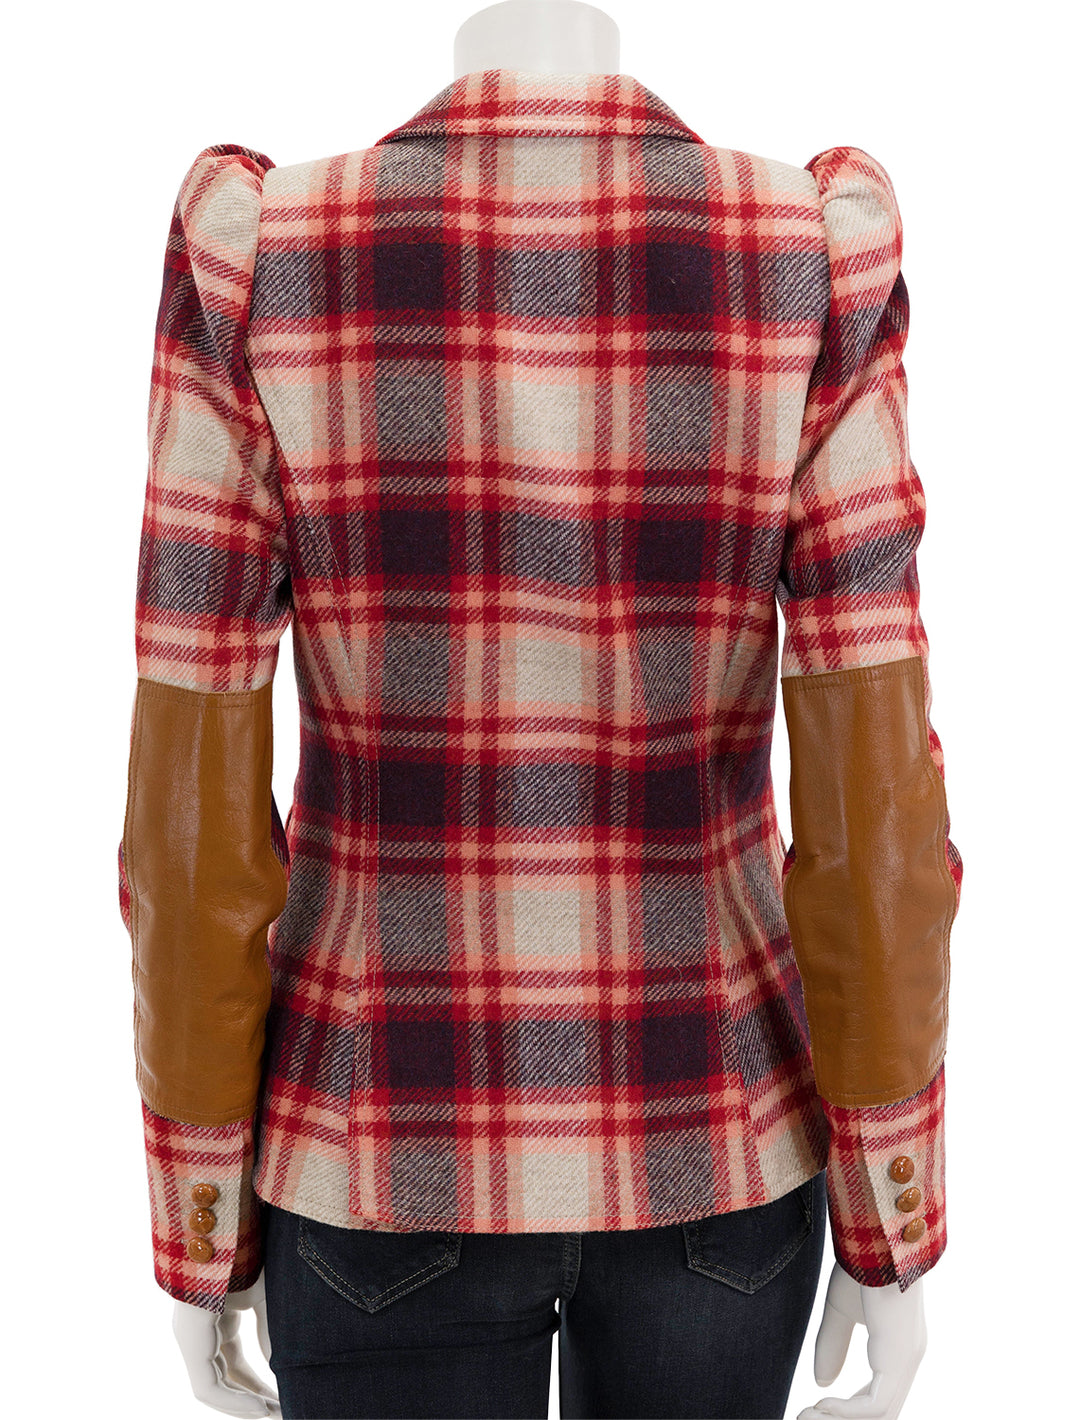 Back view of Smythe's pouf sleeve one button blazer in carrmine plaid.